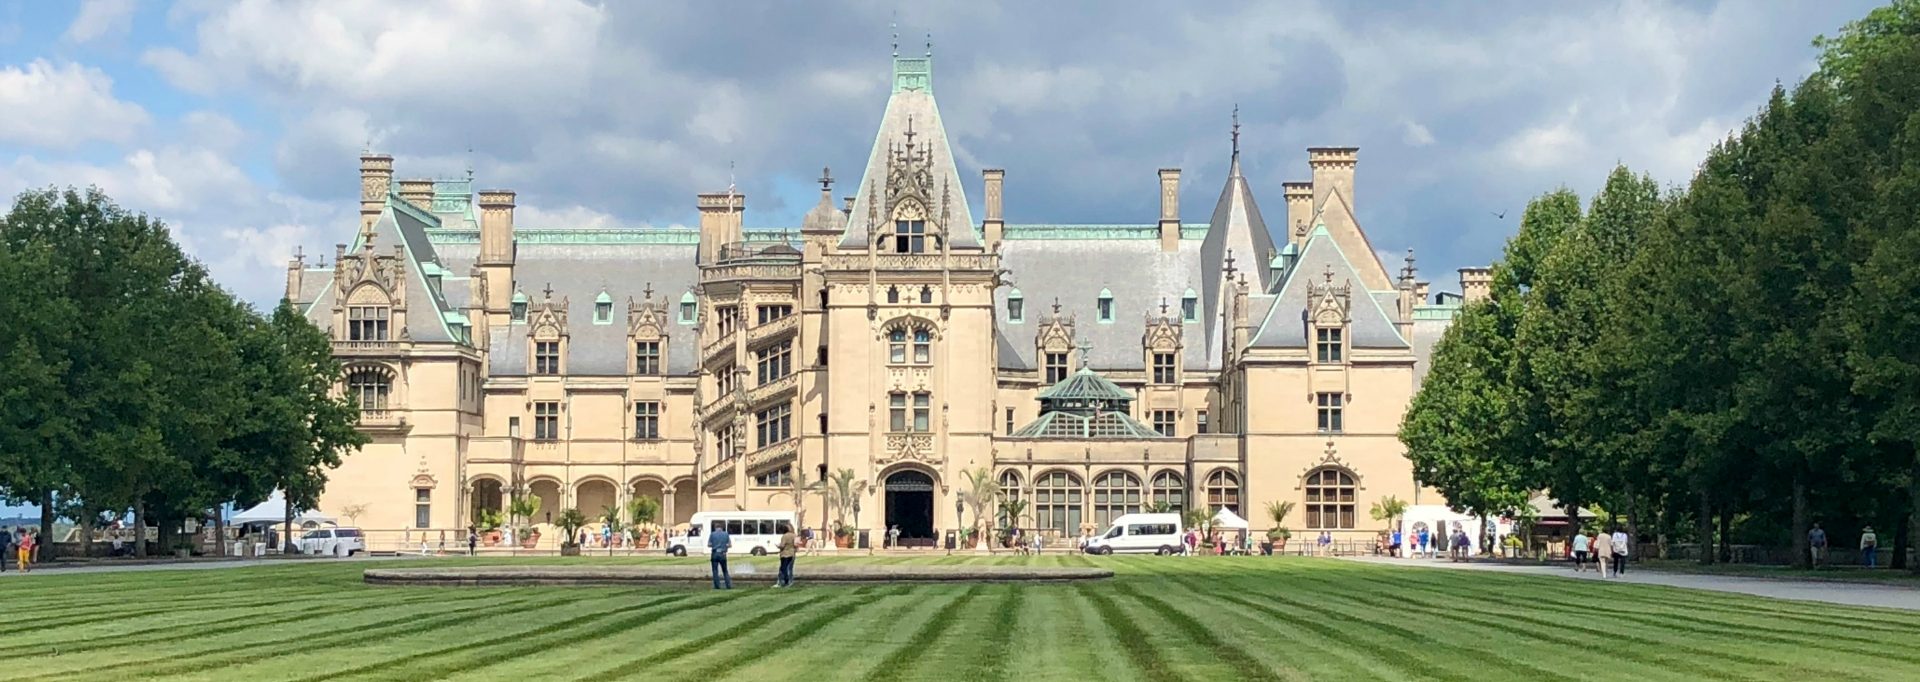 Things To Do In Asheville Biltmore